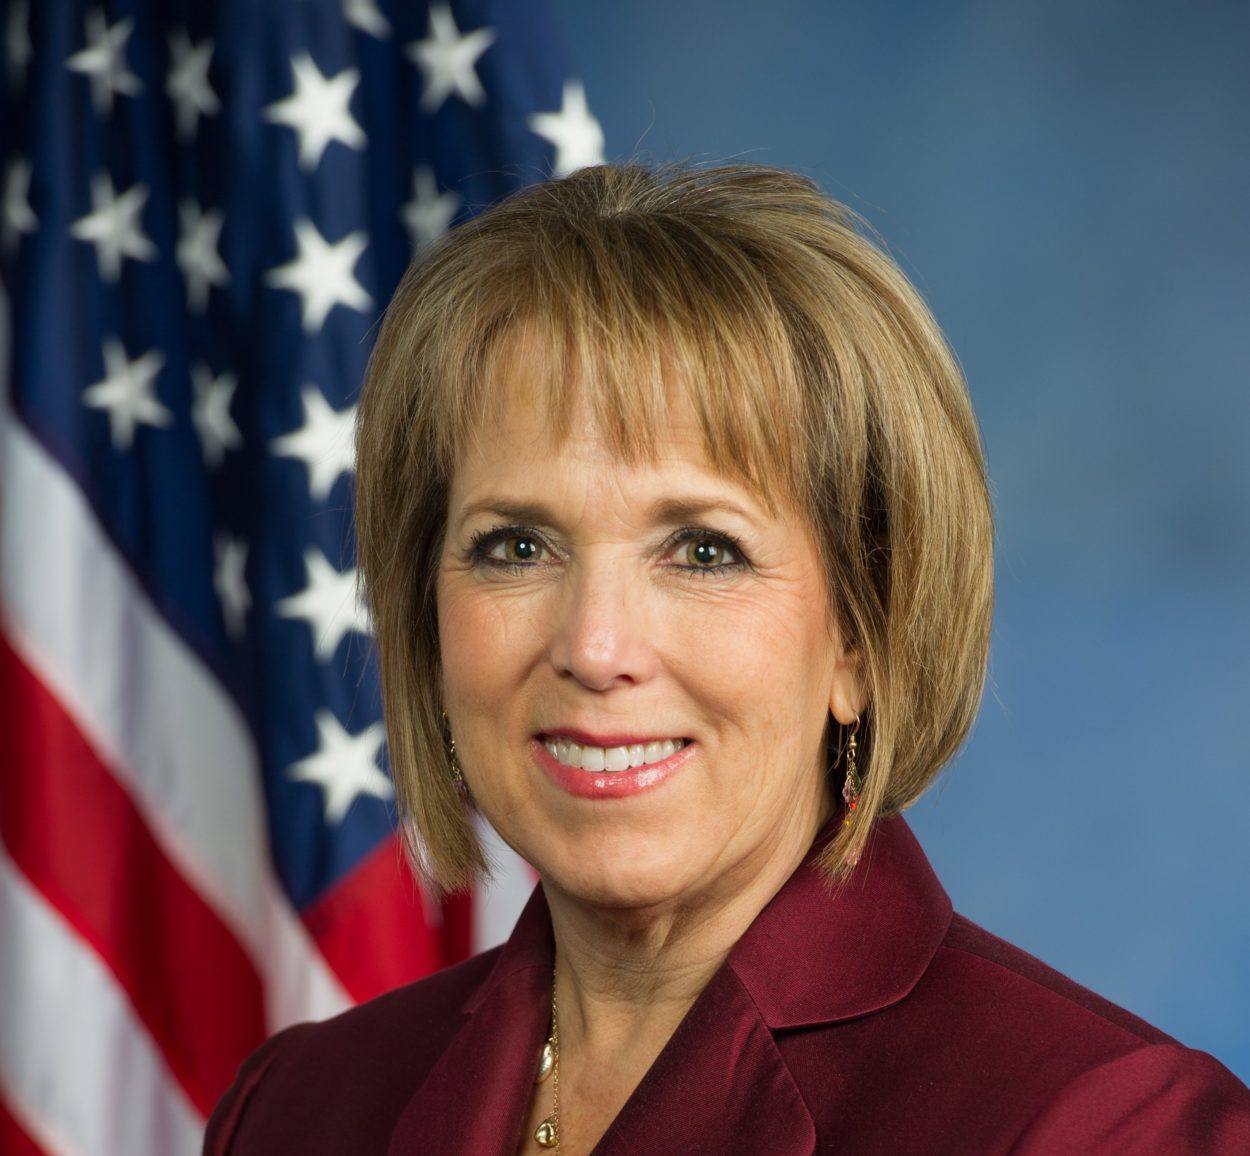 Small donors make a showing for Lujan Grisham